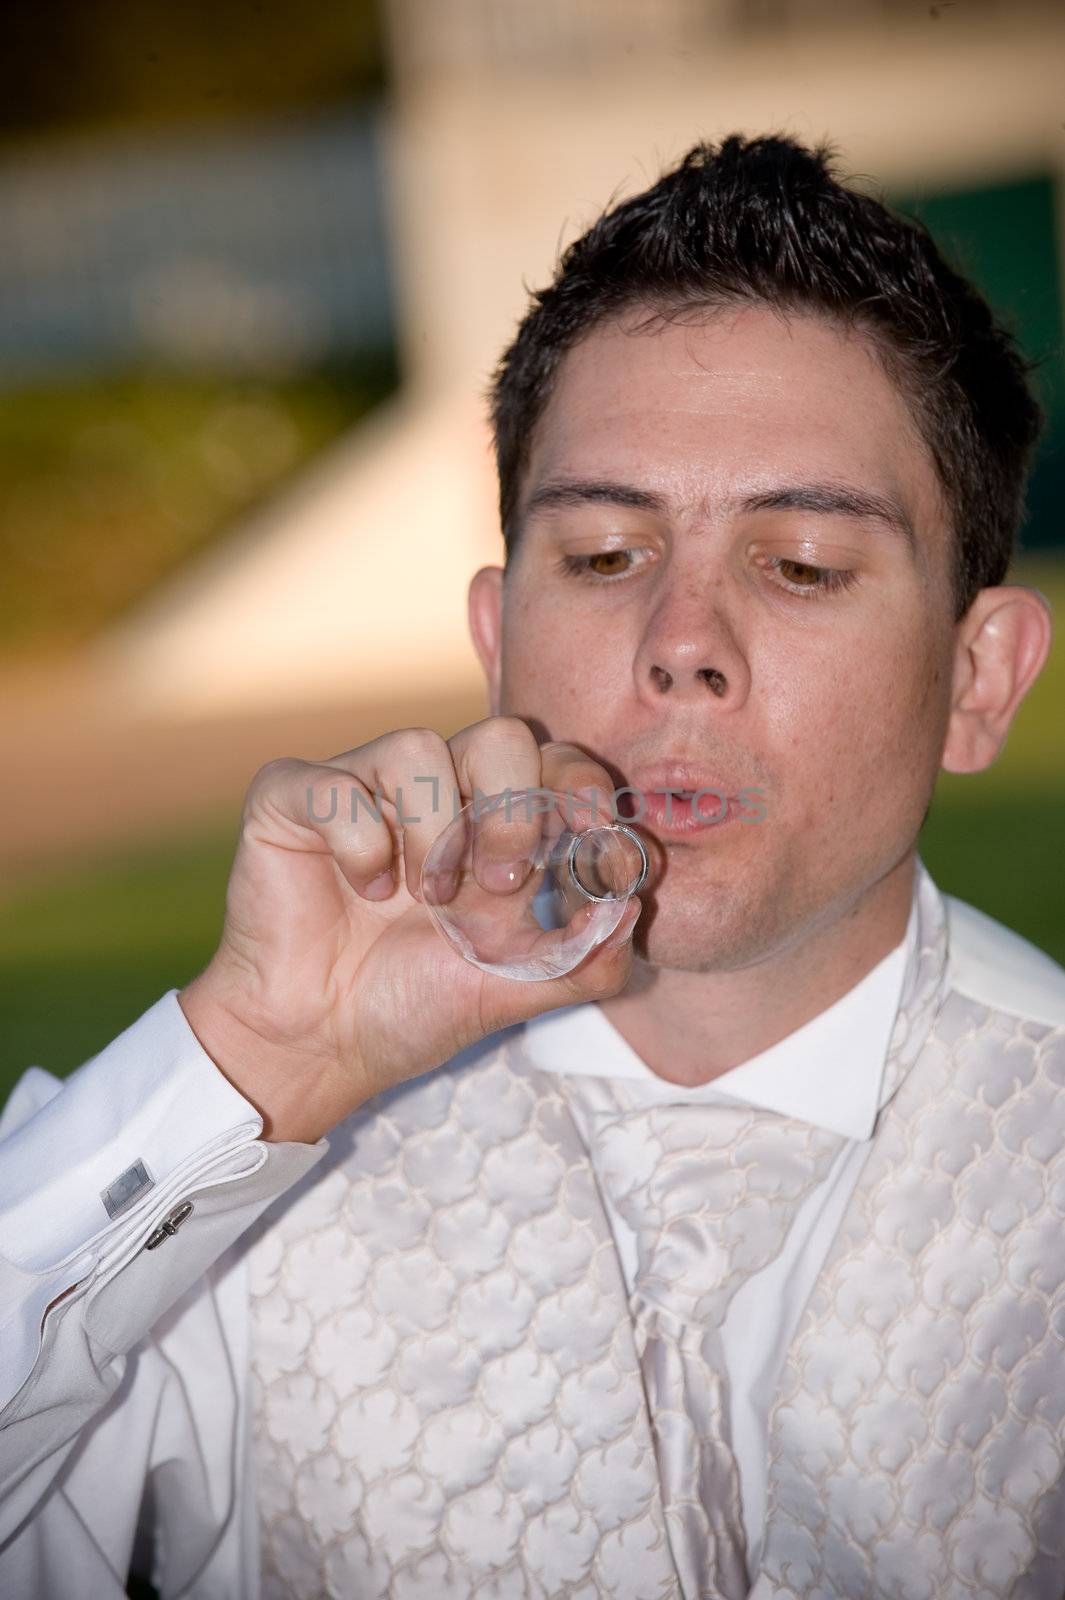 attractive well dressed groom blowing bubbles through a wedding ring